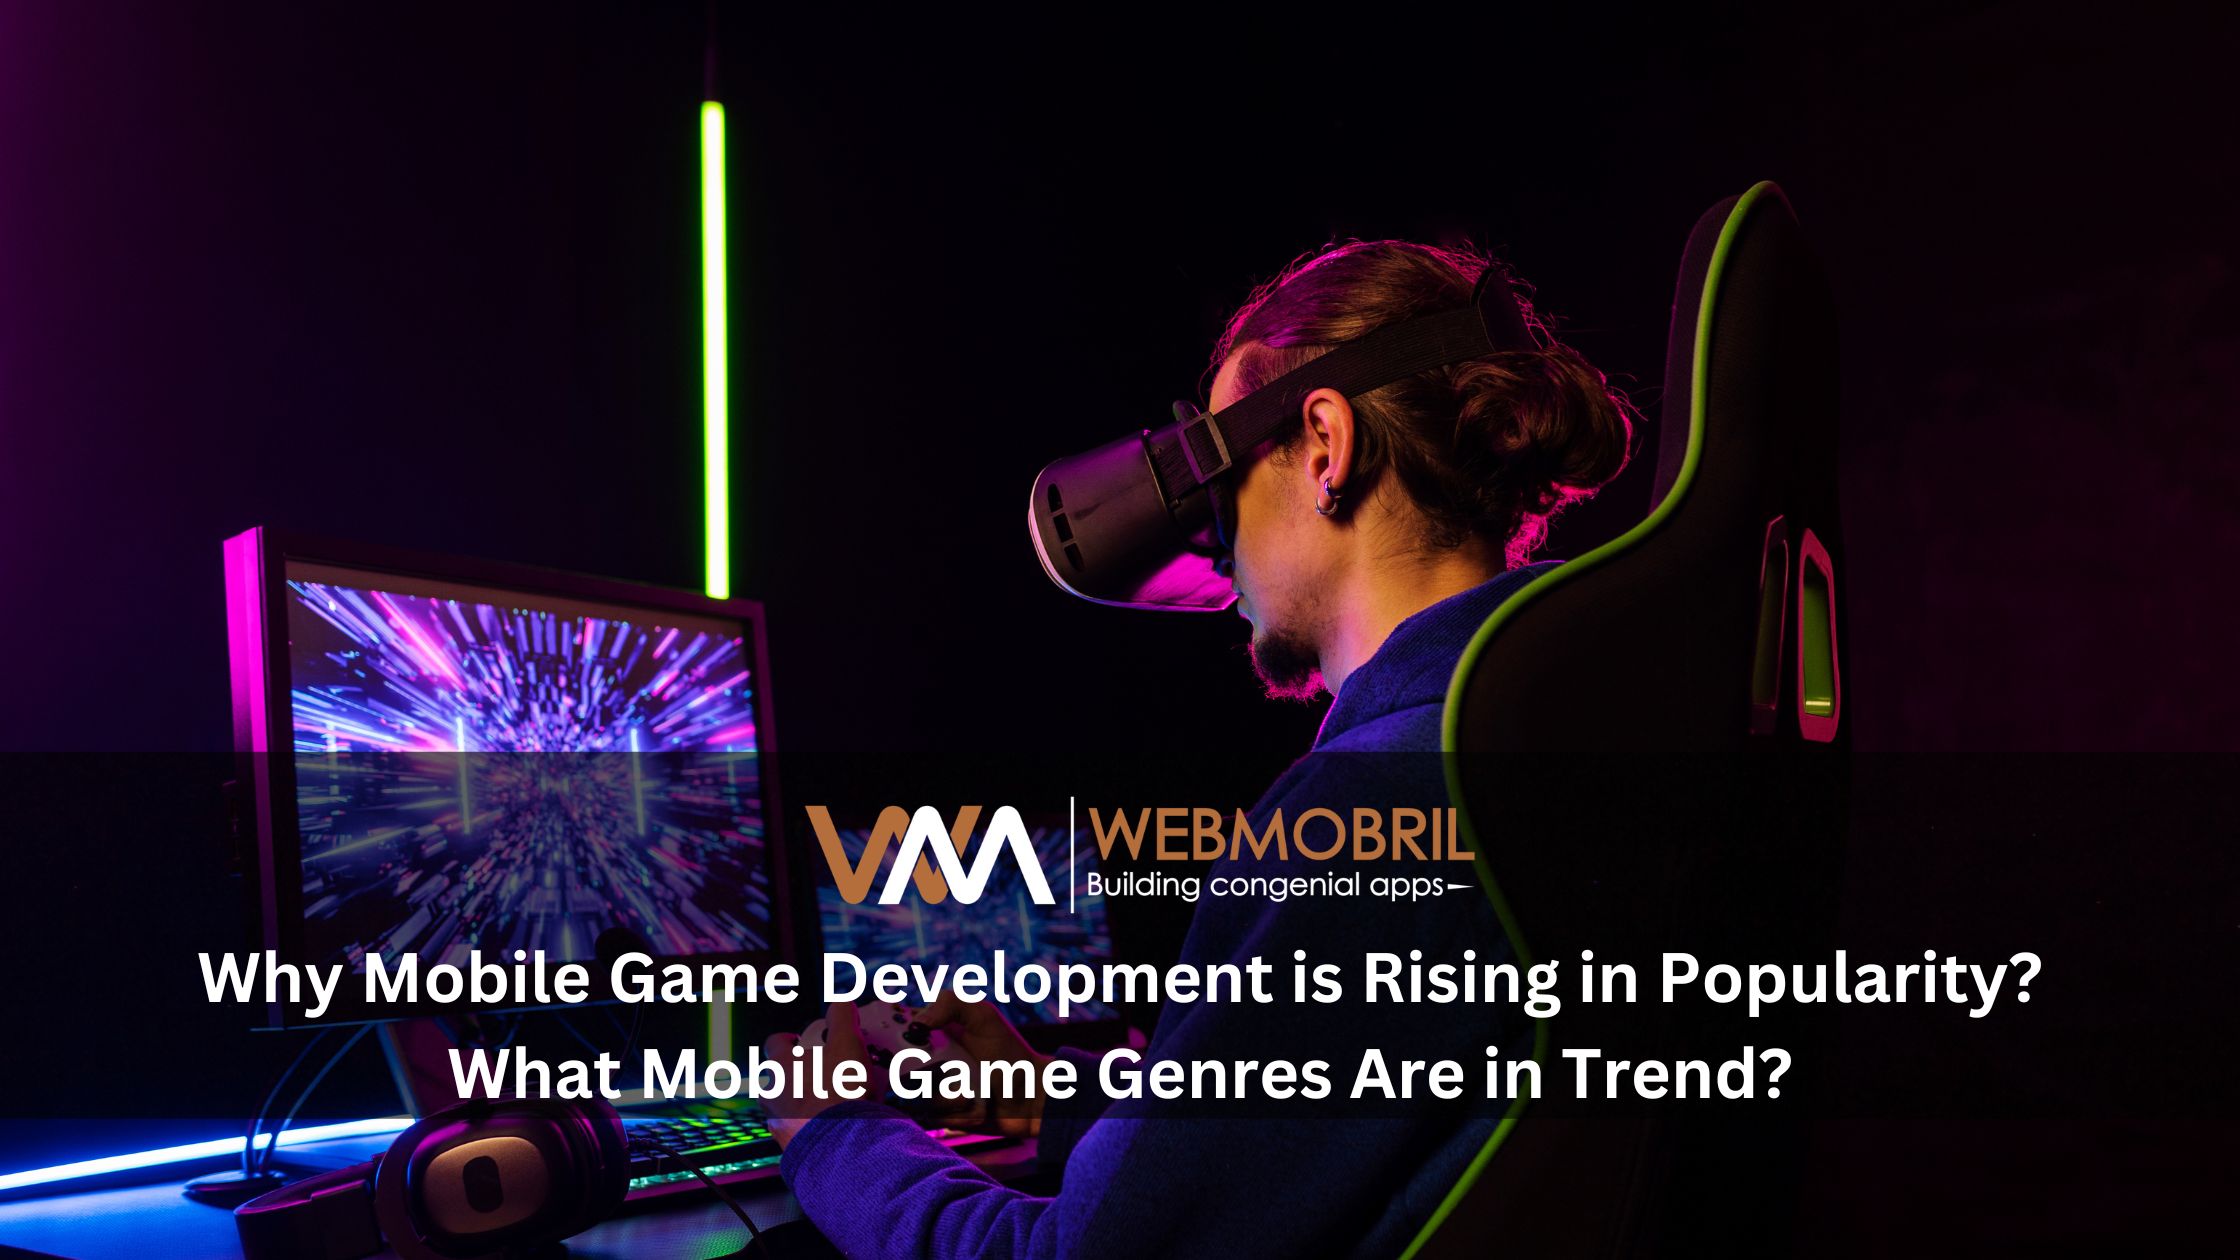 What Mobile Game Genres Are in Trend – Rise in Mobile Game Development